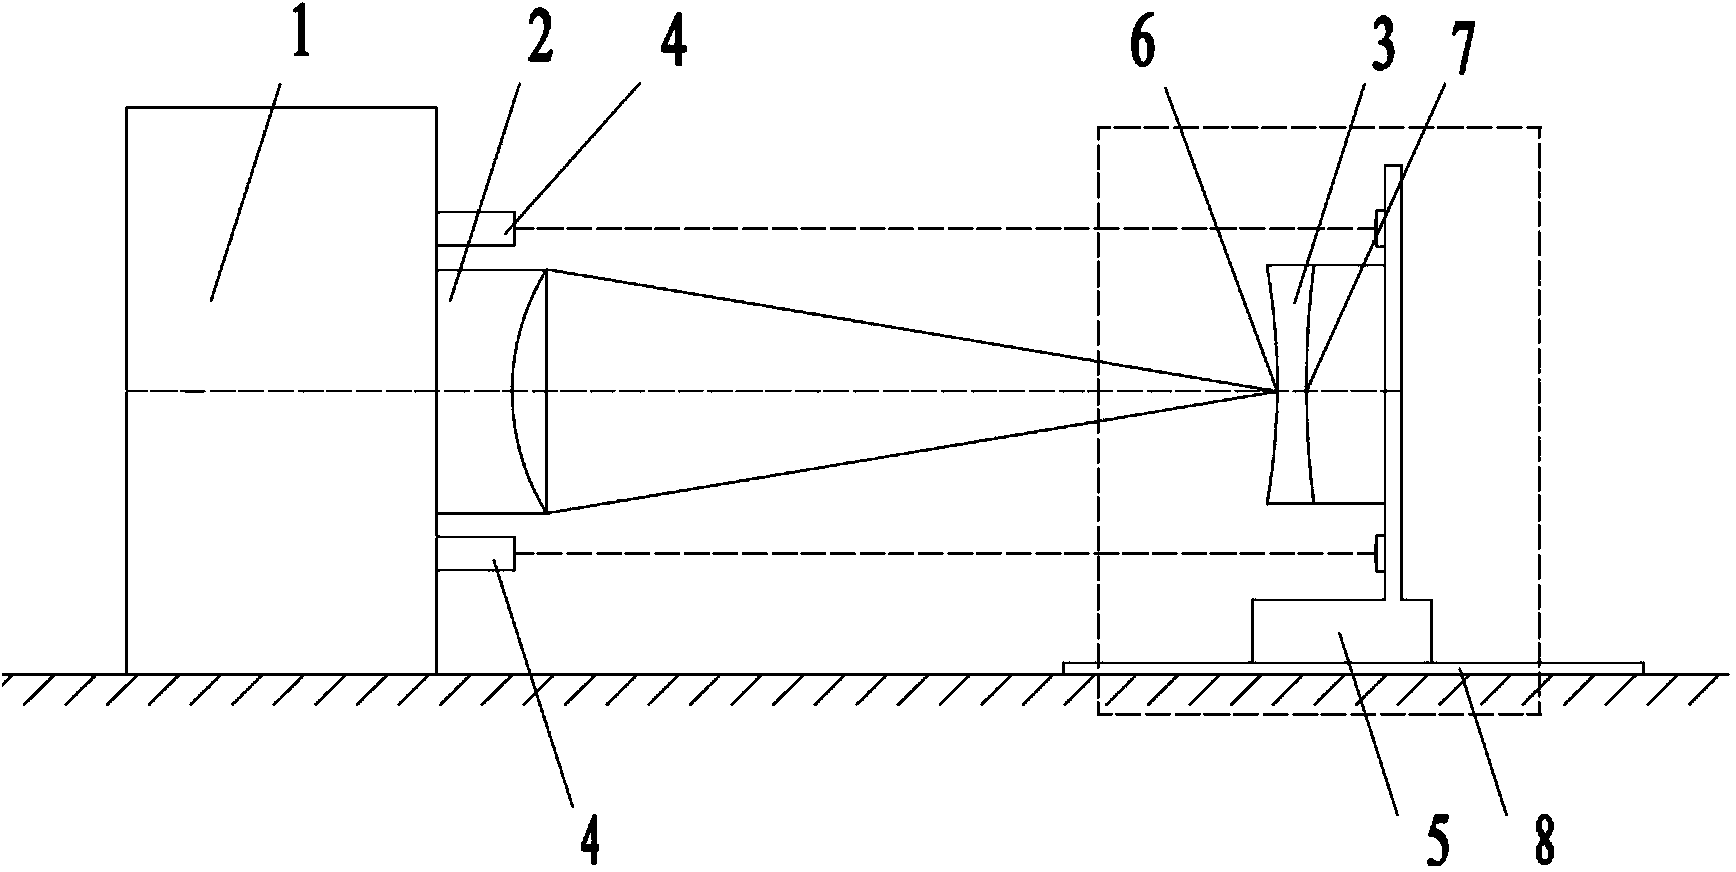 Interference measurement method for refractive index of lens